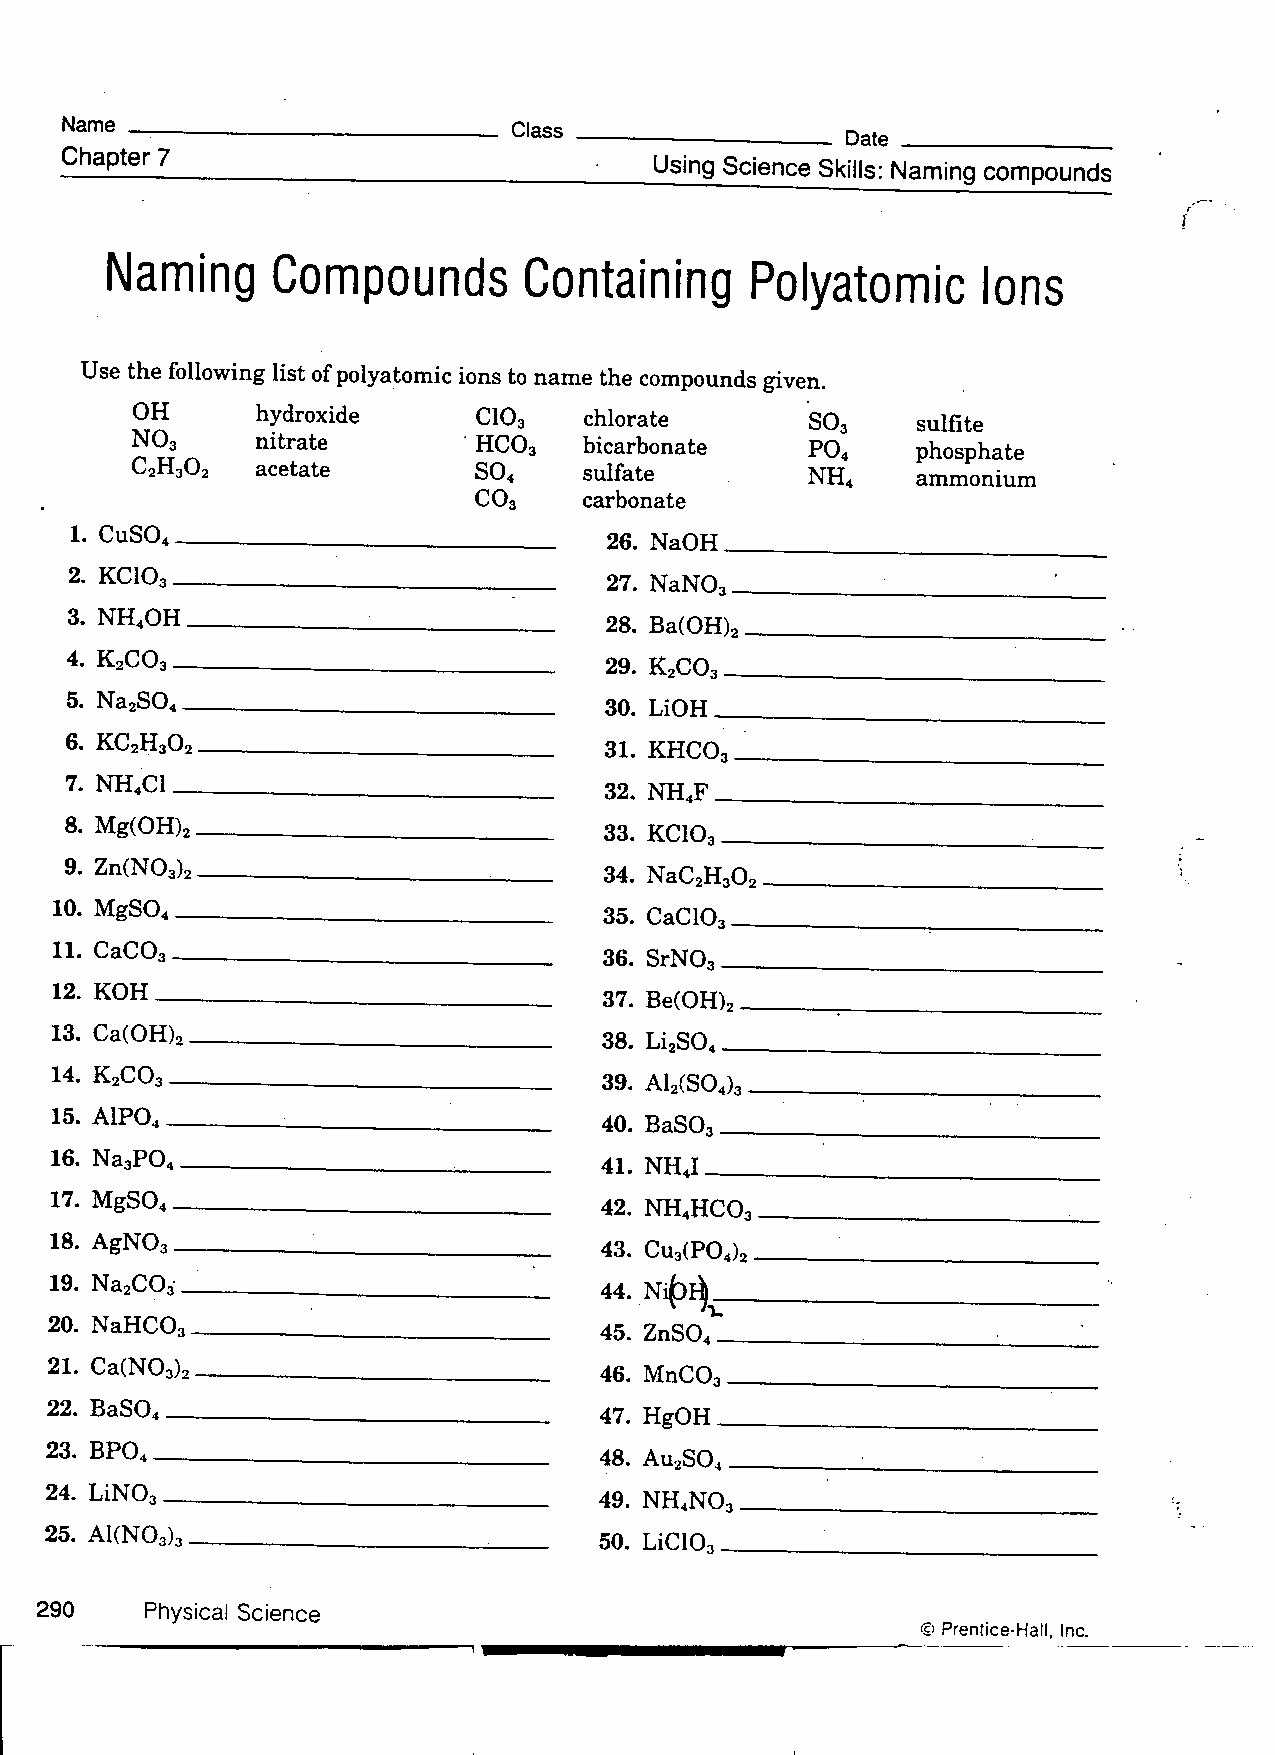 Worksheet Chemical Bonding Ionic and Covalent Answers Also Overview Chemical Bonds Worksheet Answers Breadandhearth